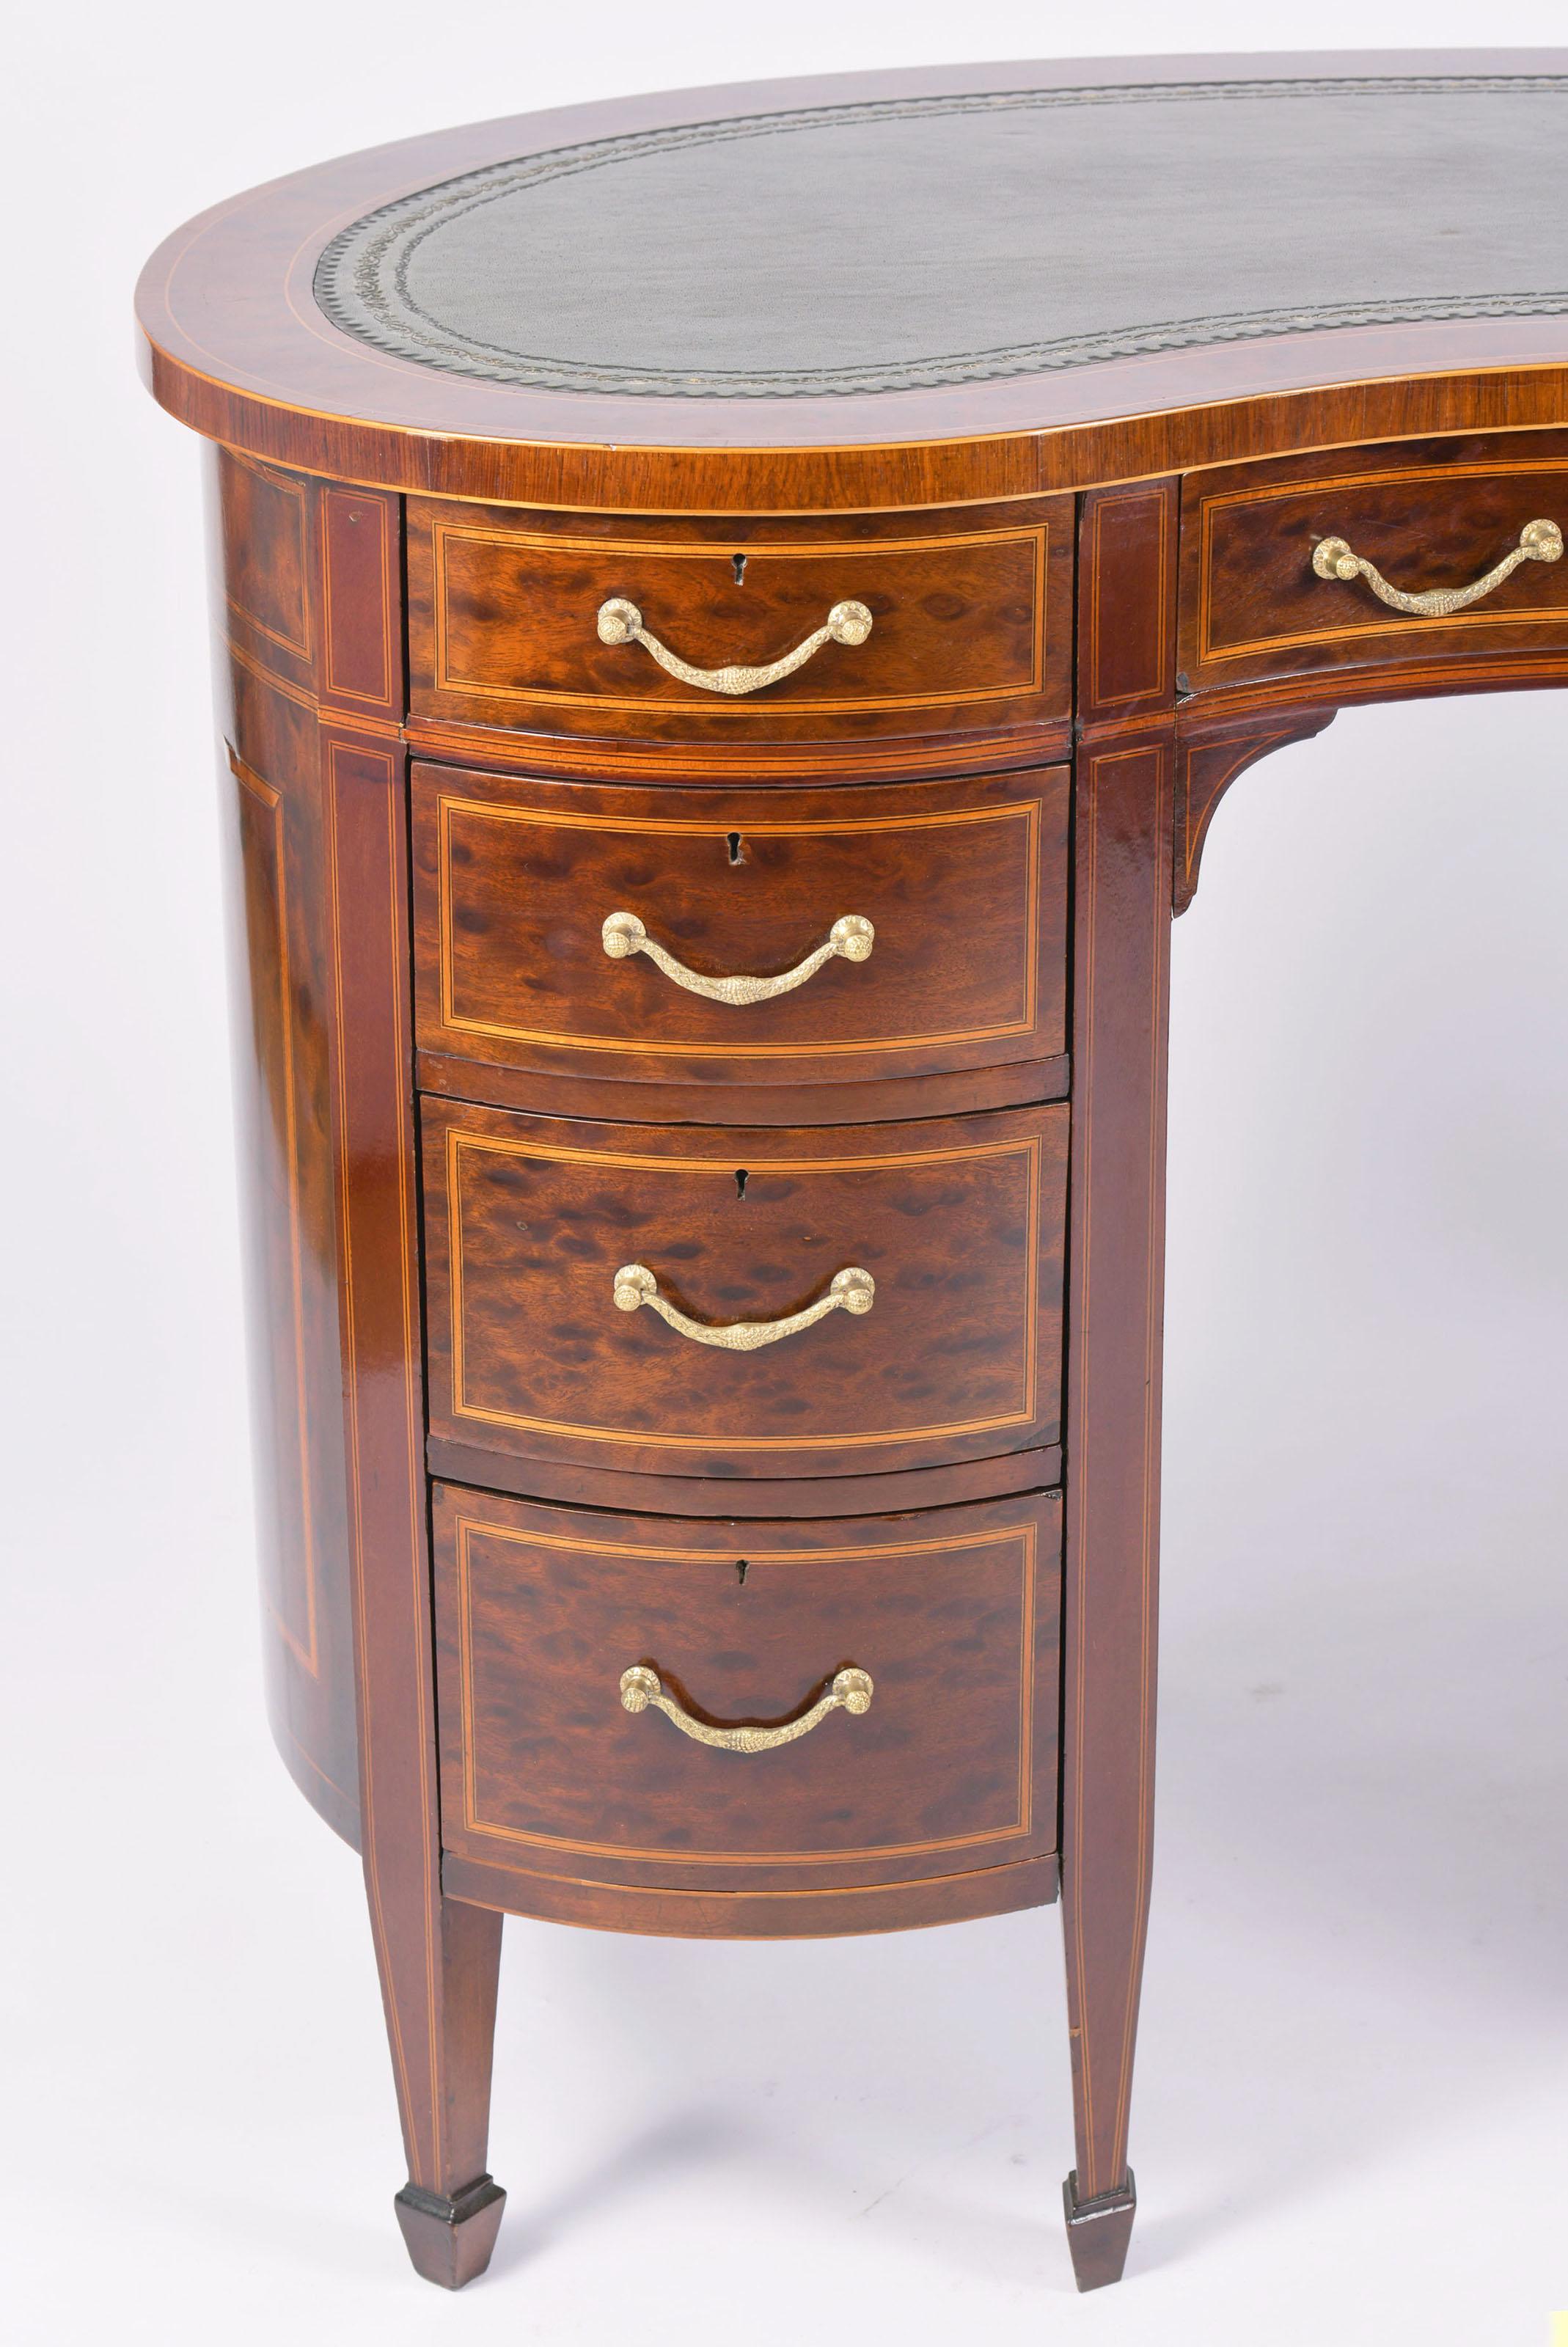 This very fine and attractive Edwardian mahogany shaped desk is inlaid with Boxwood stringing and a tooled leather inset top. The desk features the original hardware and crossbanded satinwood detailing. 
It measures 48 in – 122 cm wide, 23 in – 58